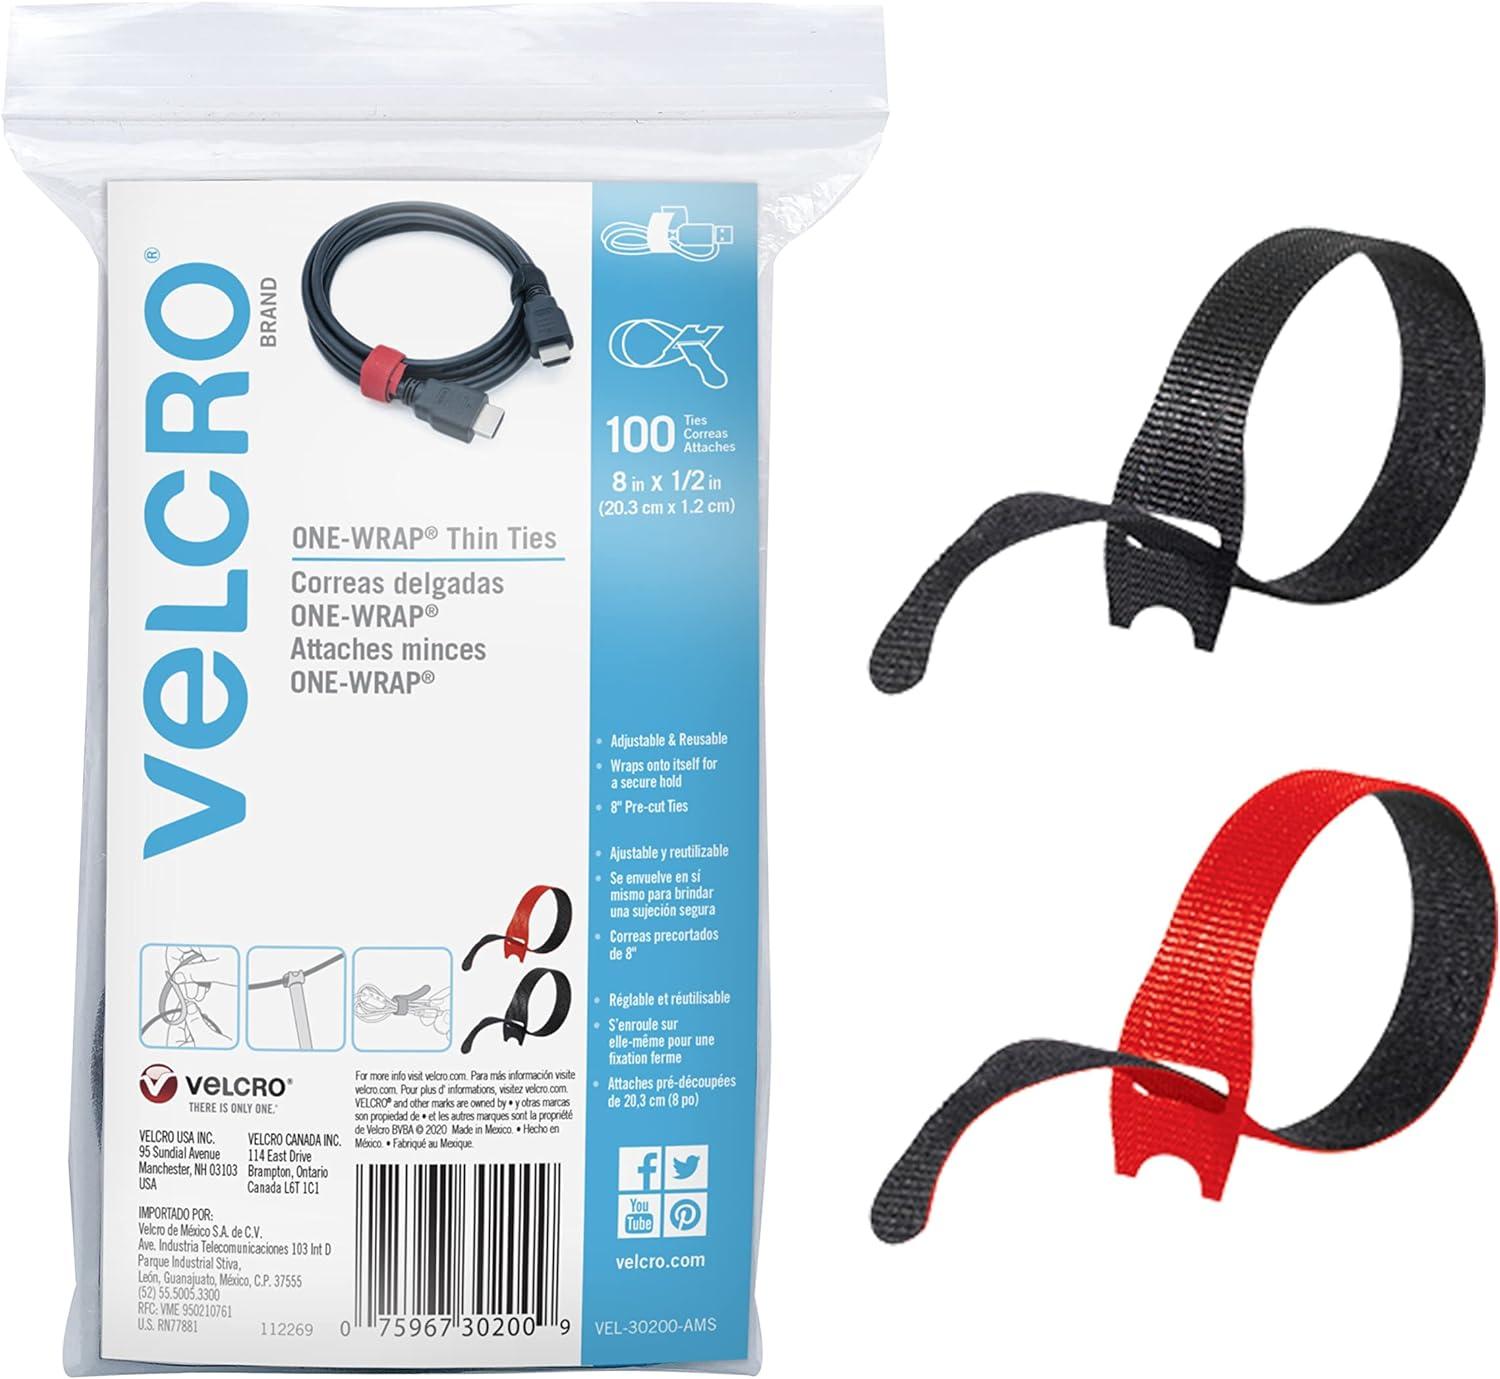 Velcro One-Wrap Cable Ties 100 Pack for $7.98